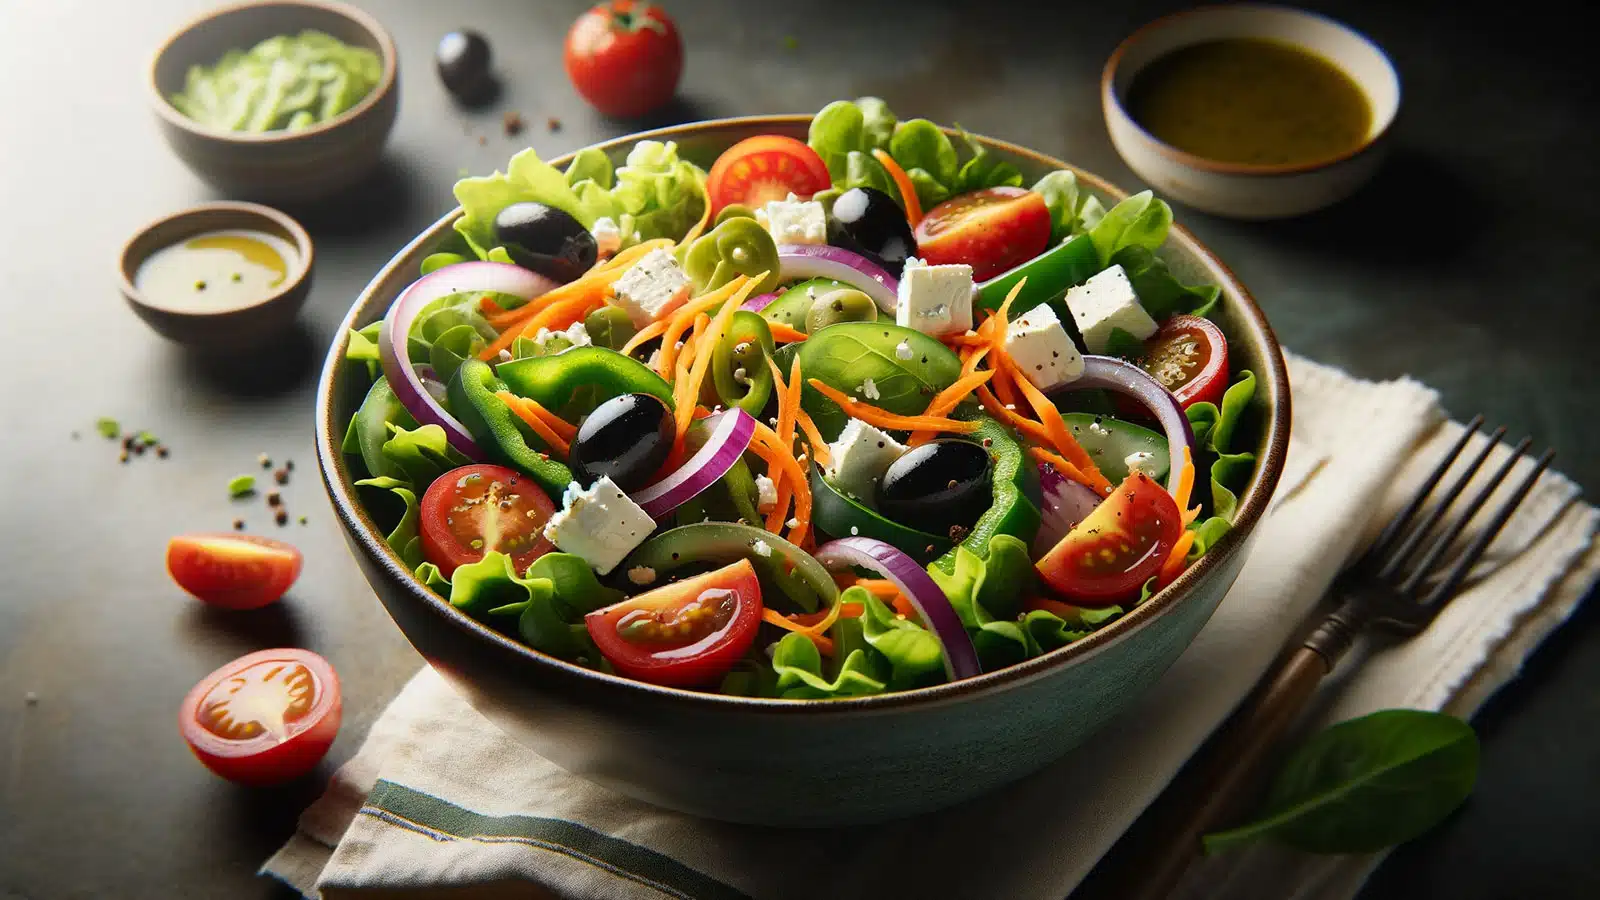 mixed greens, green pepper, cherry tomato, red onion, sliced black olives, shredded carrots, feta cheese, and choice of house dressings